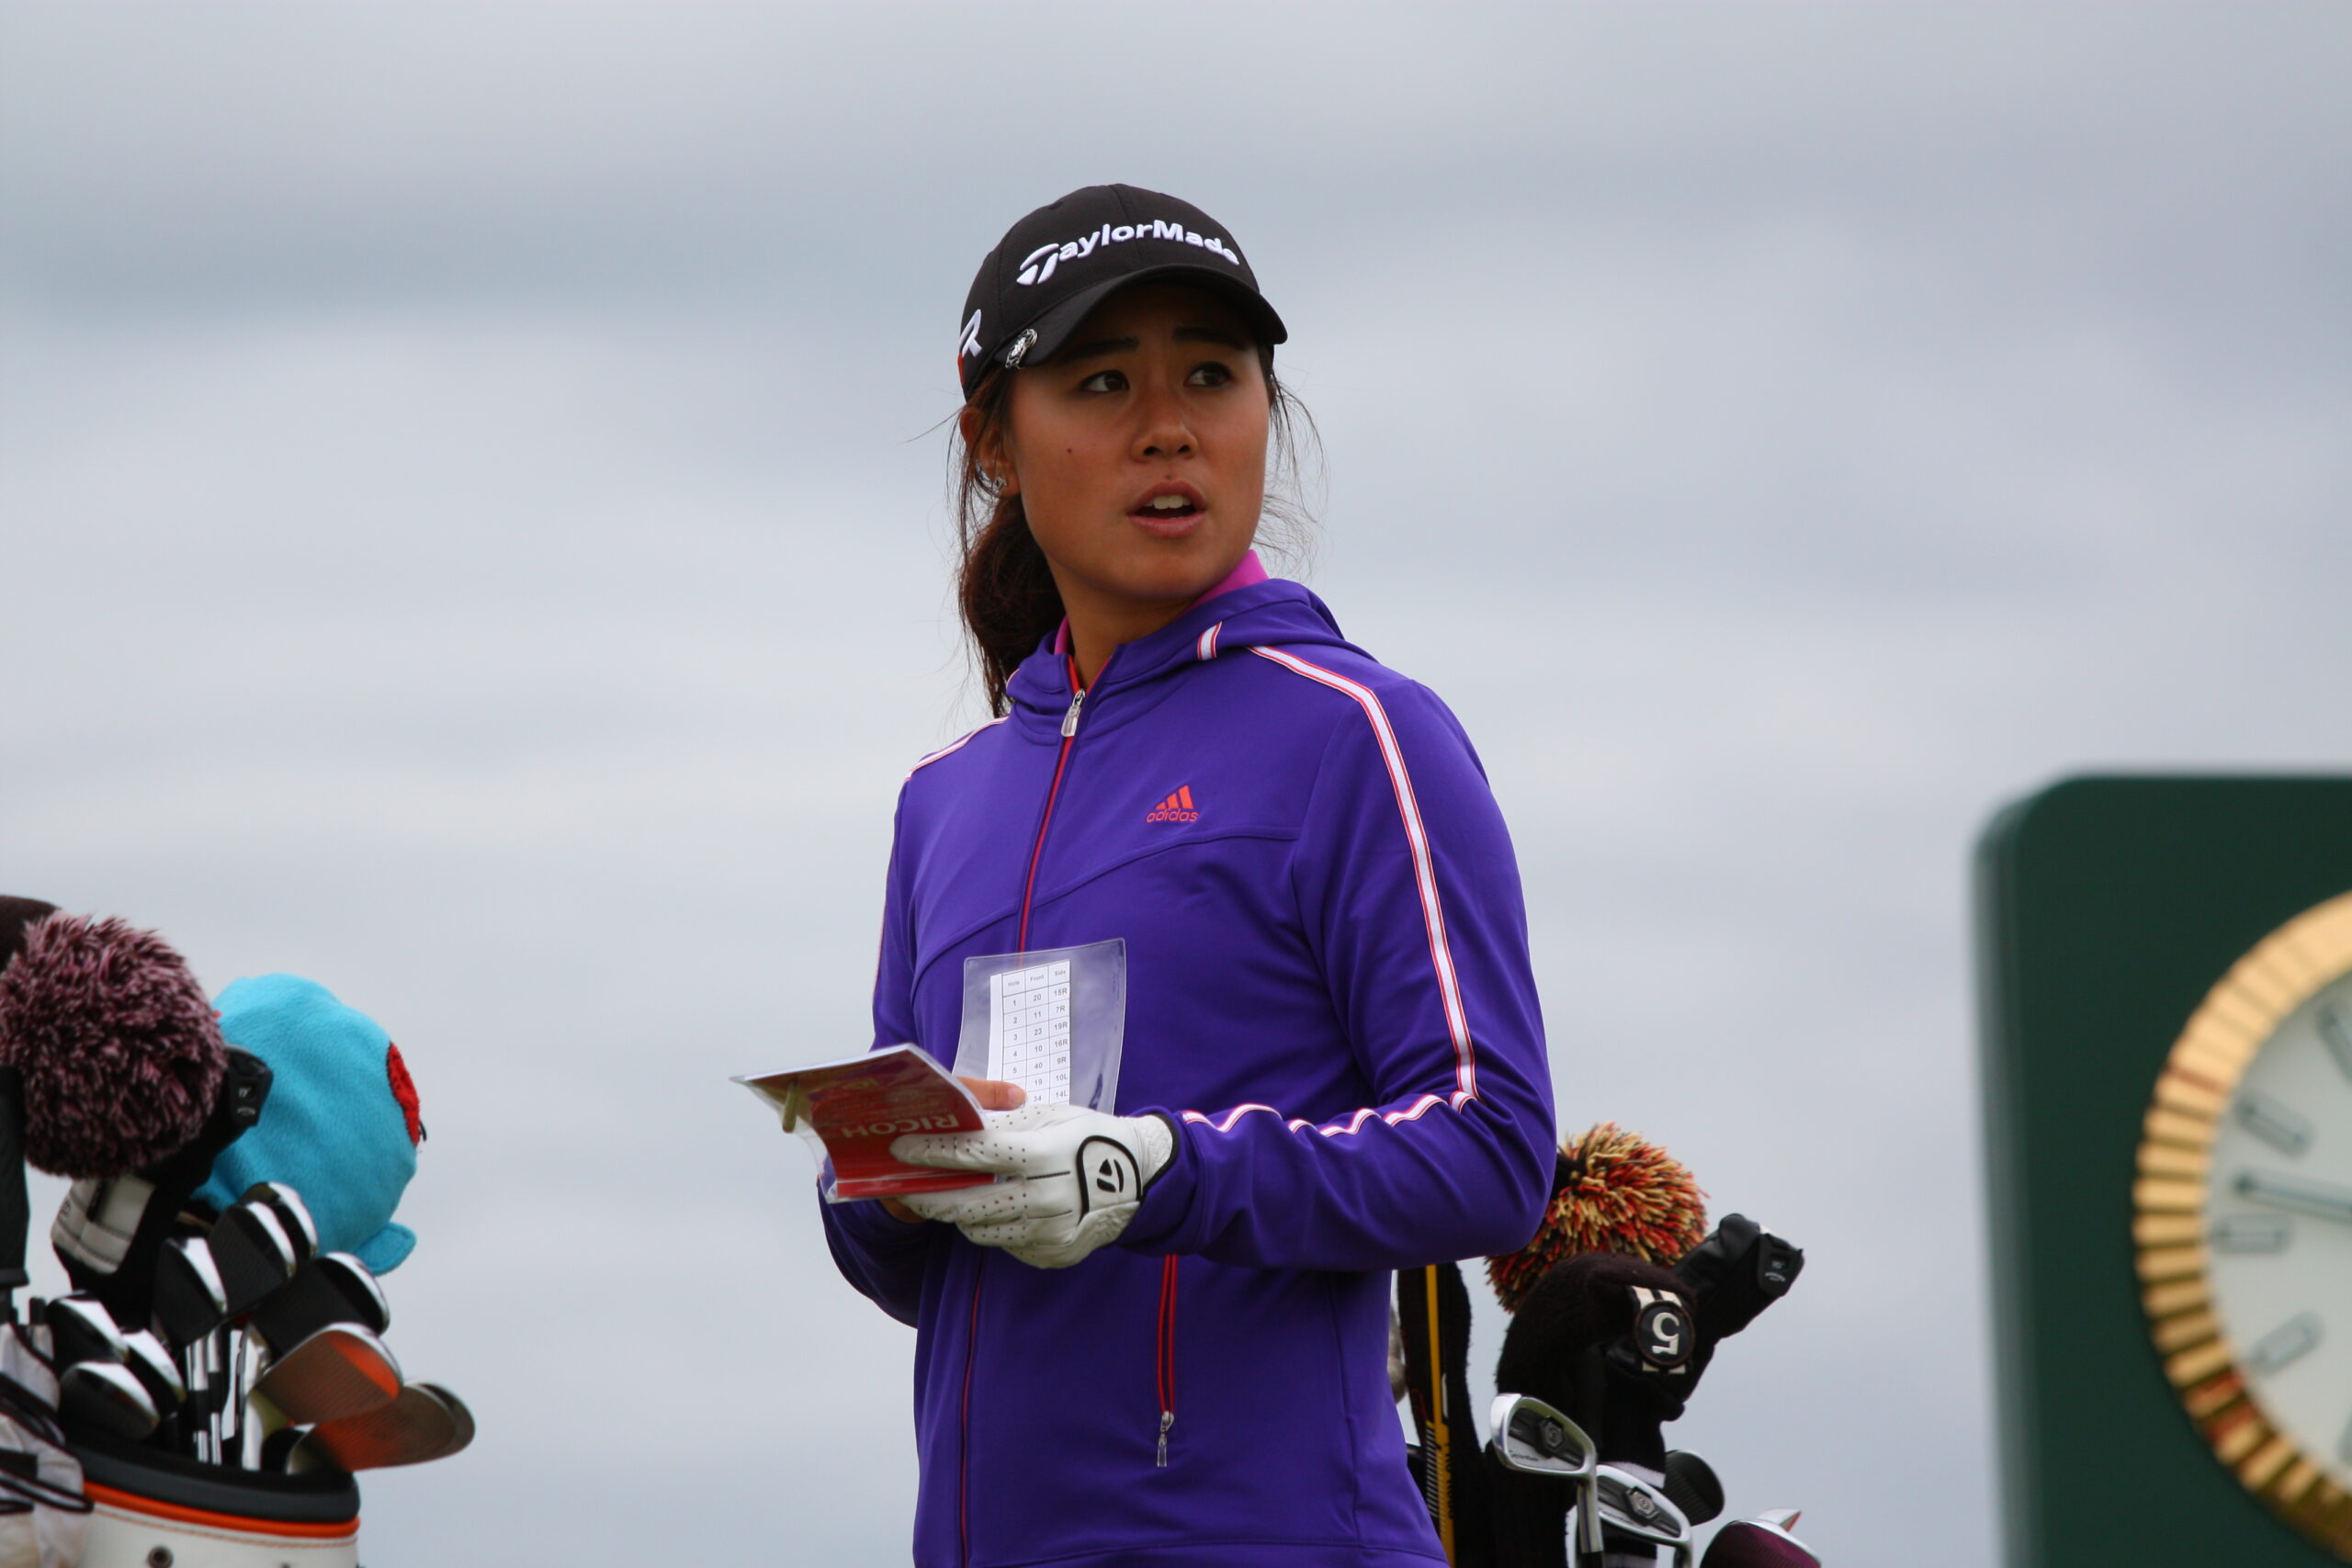 Danielle Kang to take a leave of absence from golf due to tumour